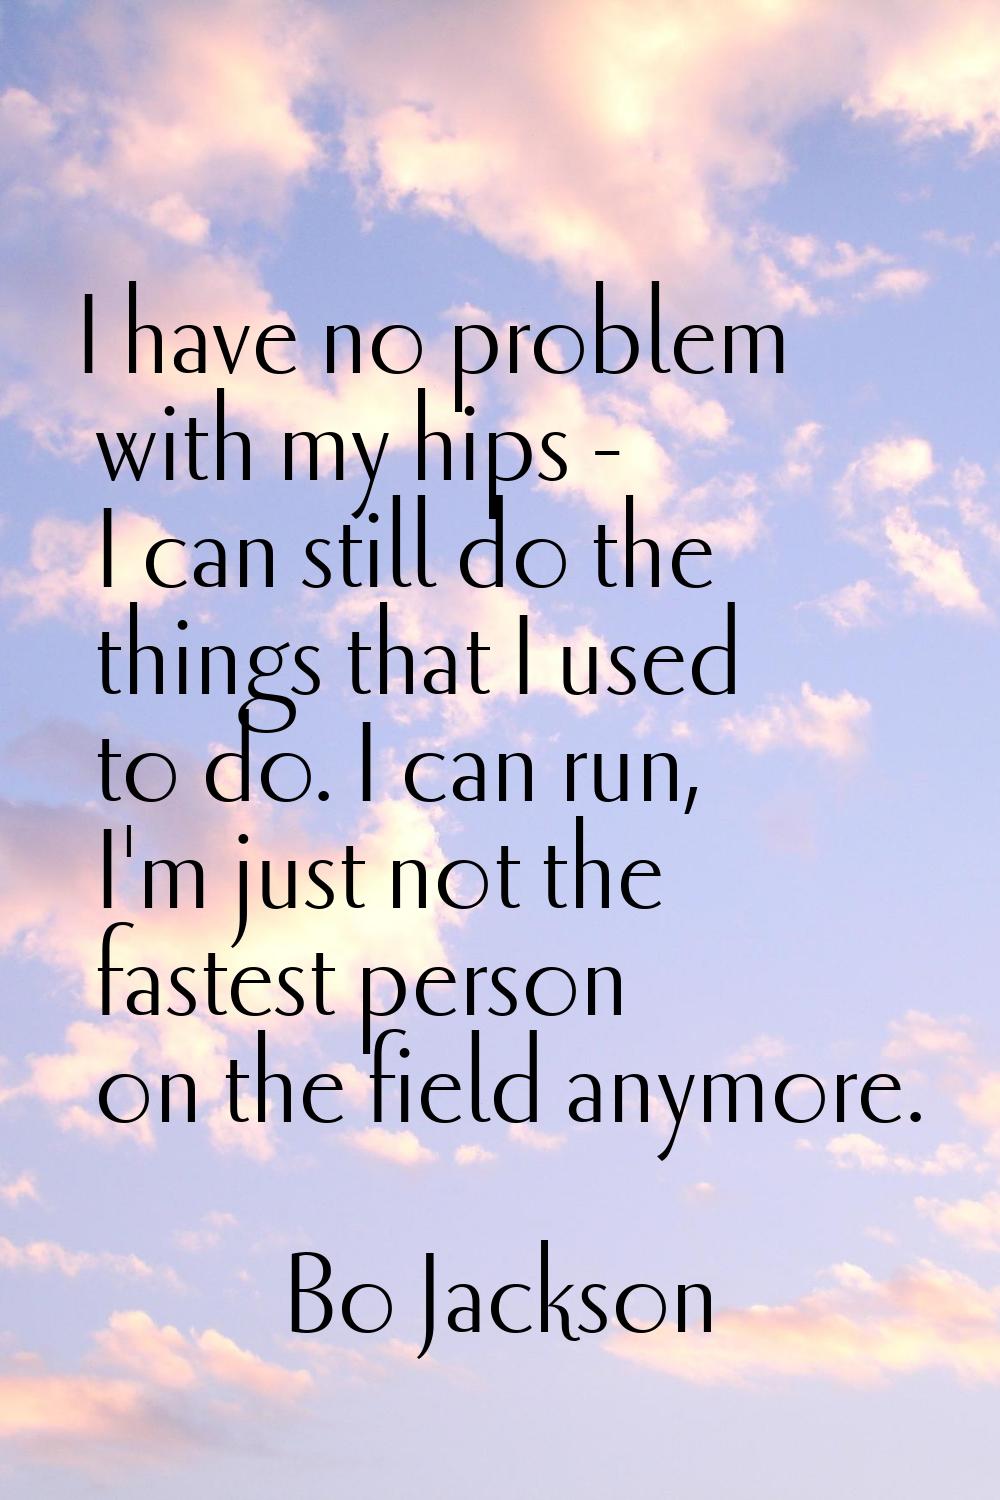 I have no problem with my hips - I can still do the things that I used to do. I can run, I'm just n